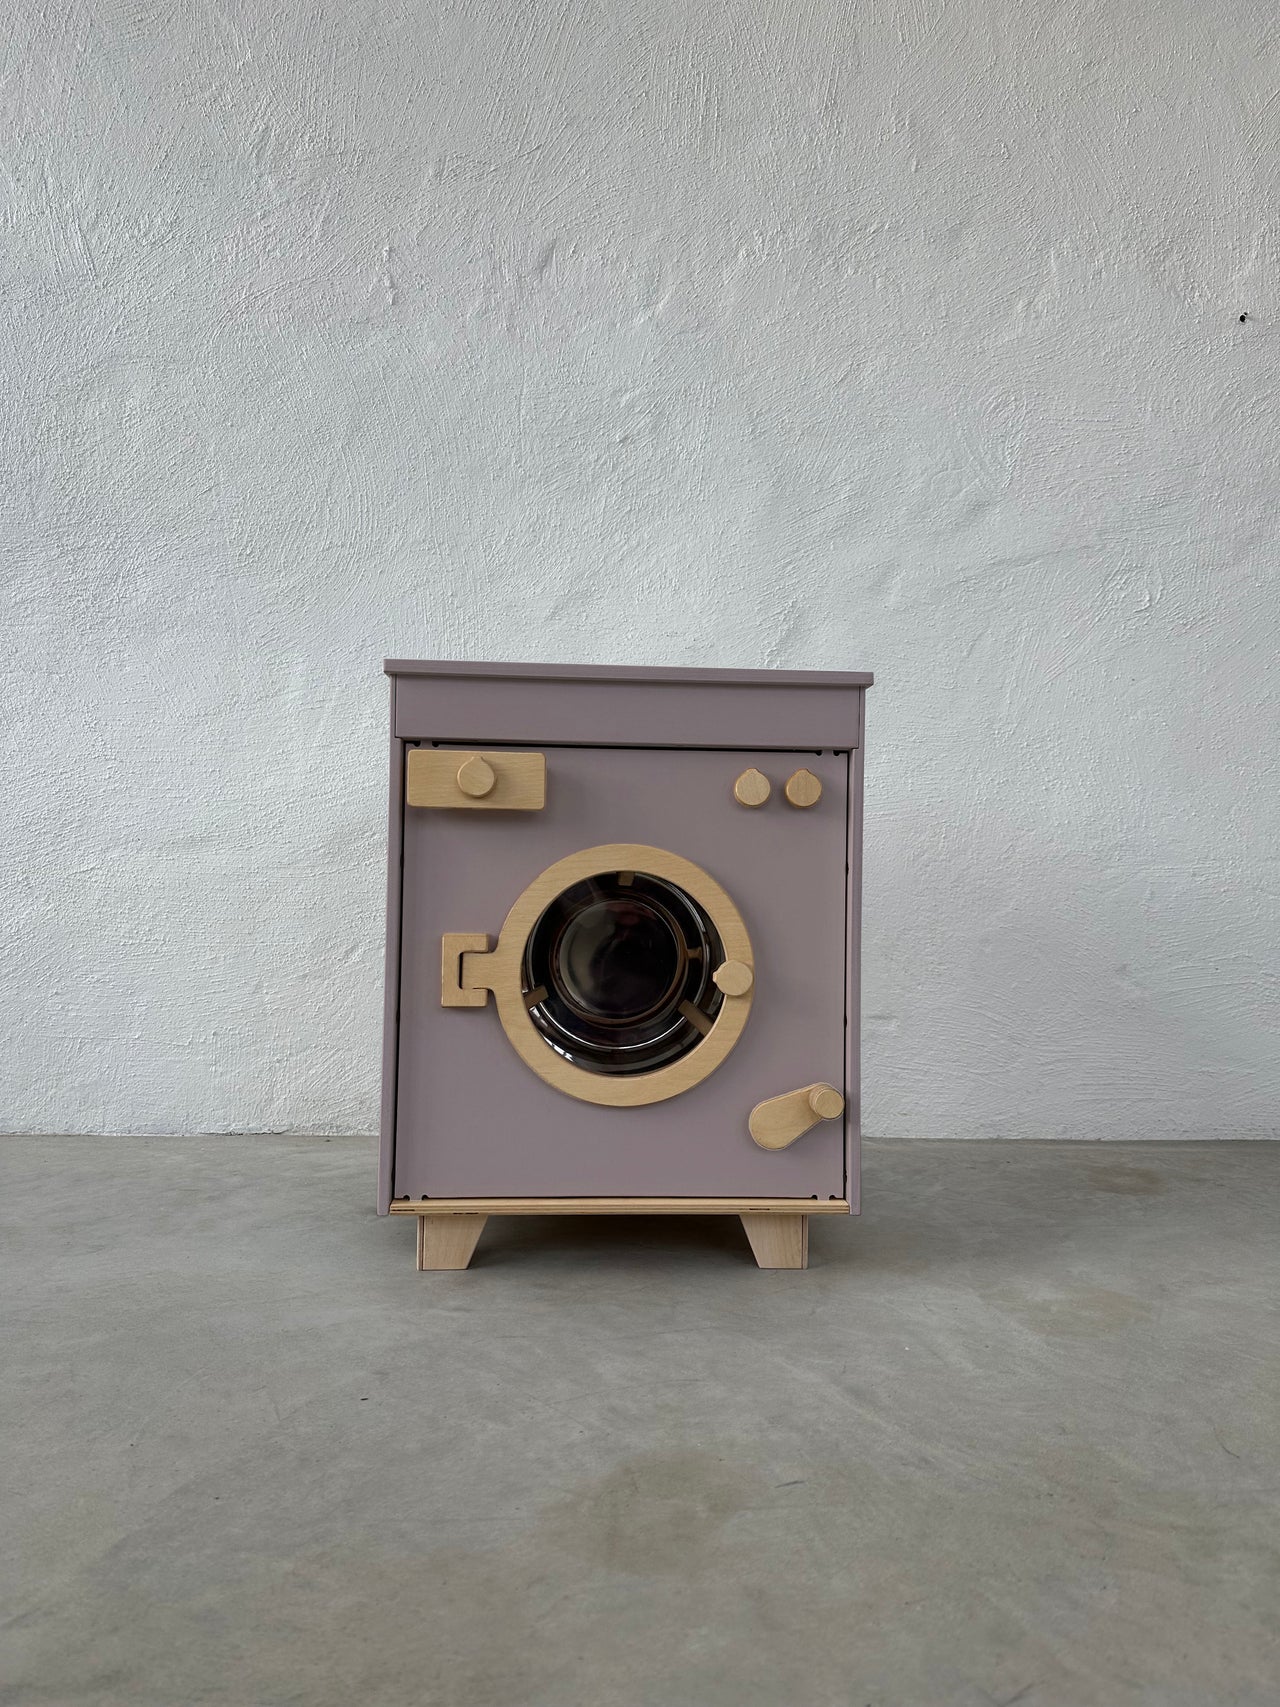 Wooden Washing Machine - White - MIDMINI - Handcrafted wooden toys for generations.